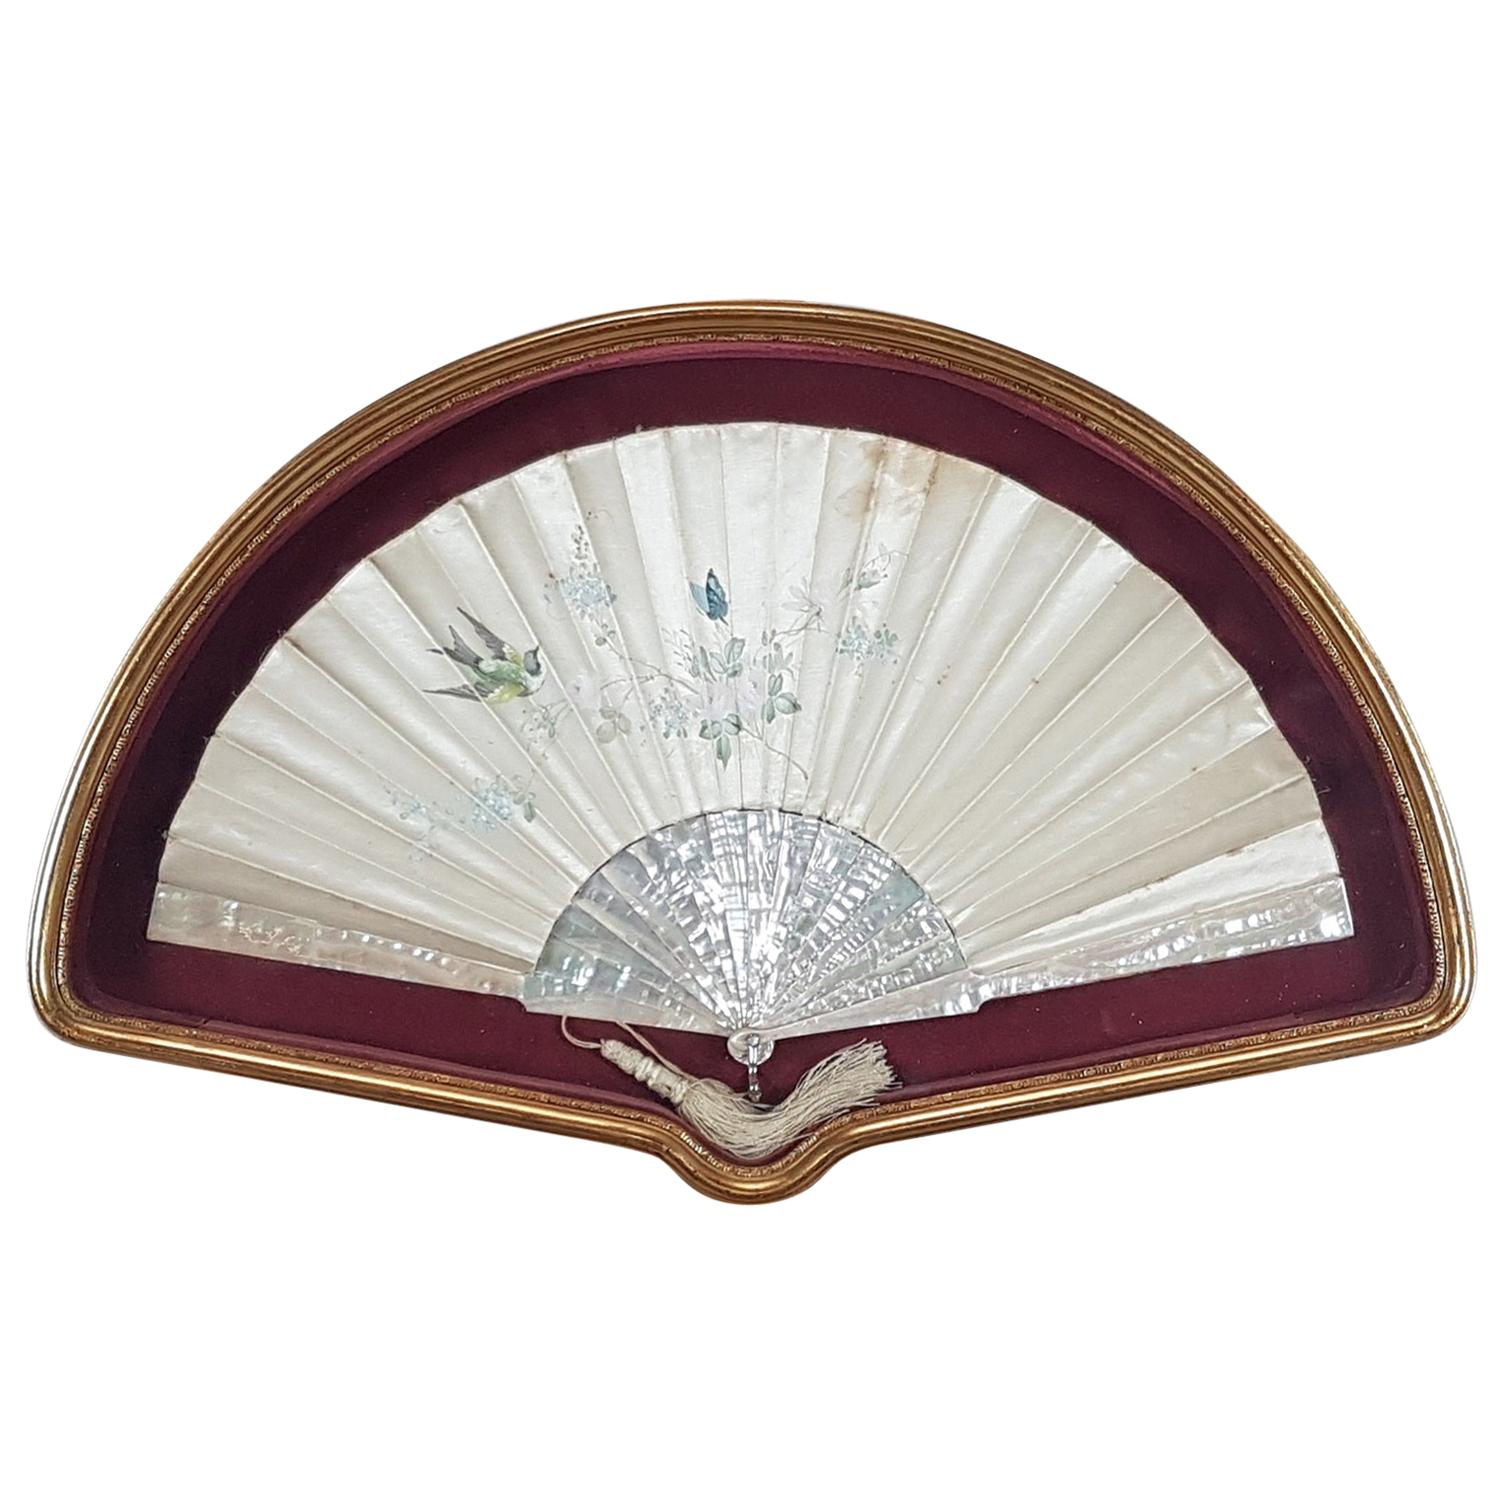 Belle Époque Folding Fan in Silk, Mother of Pearl with Hand Painted Decorations